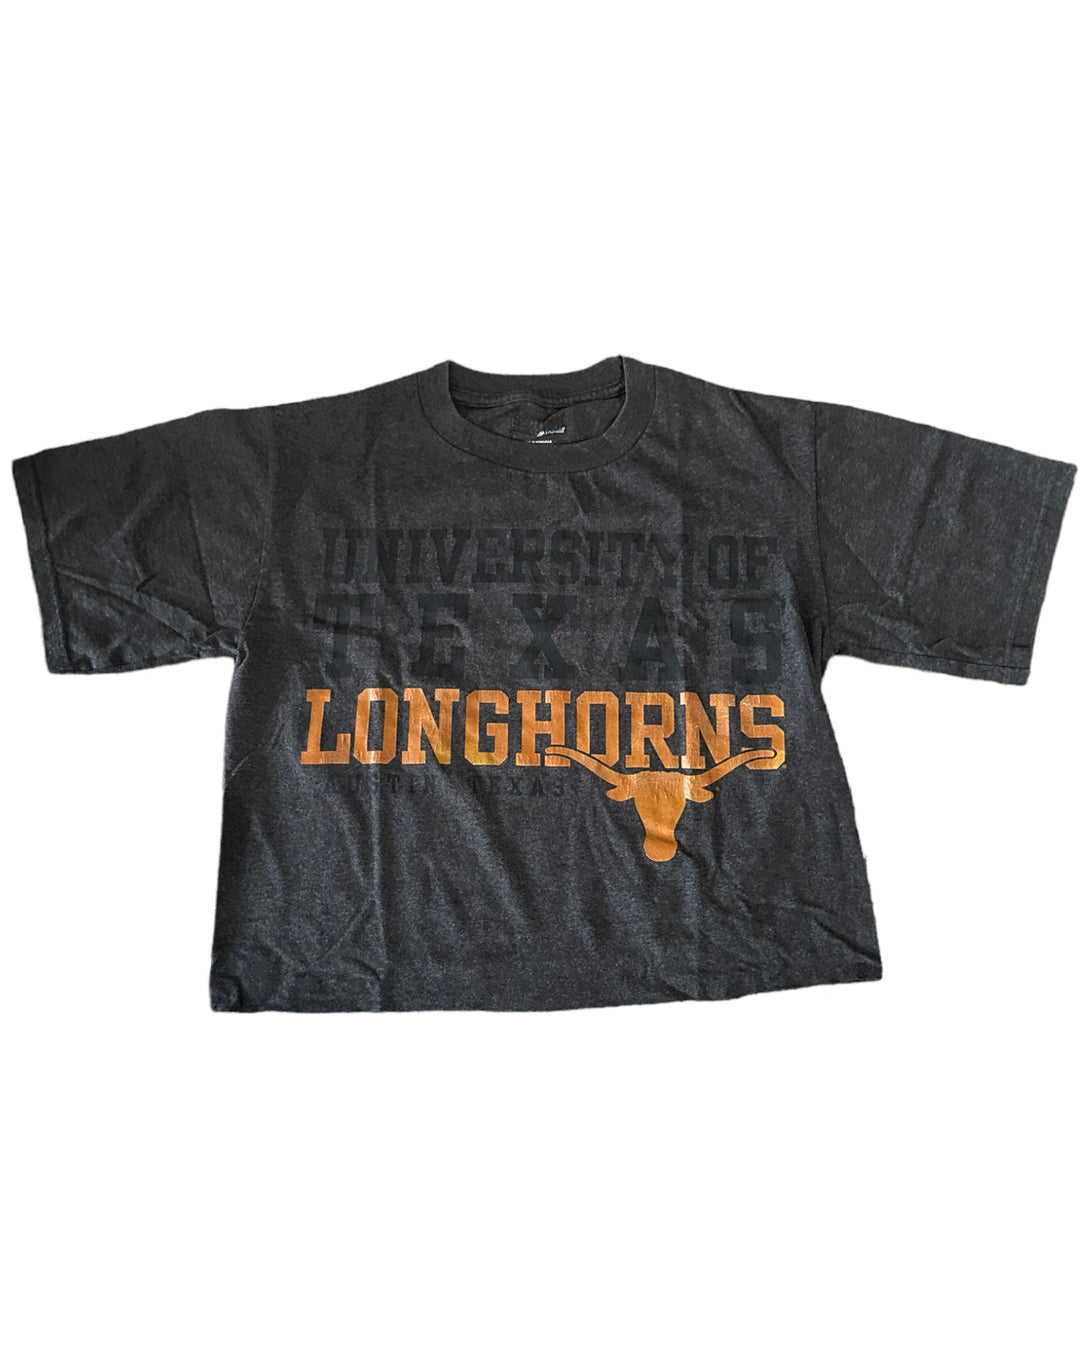 Texas Vintage Cropped T-Shirt